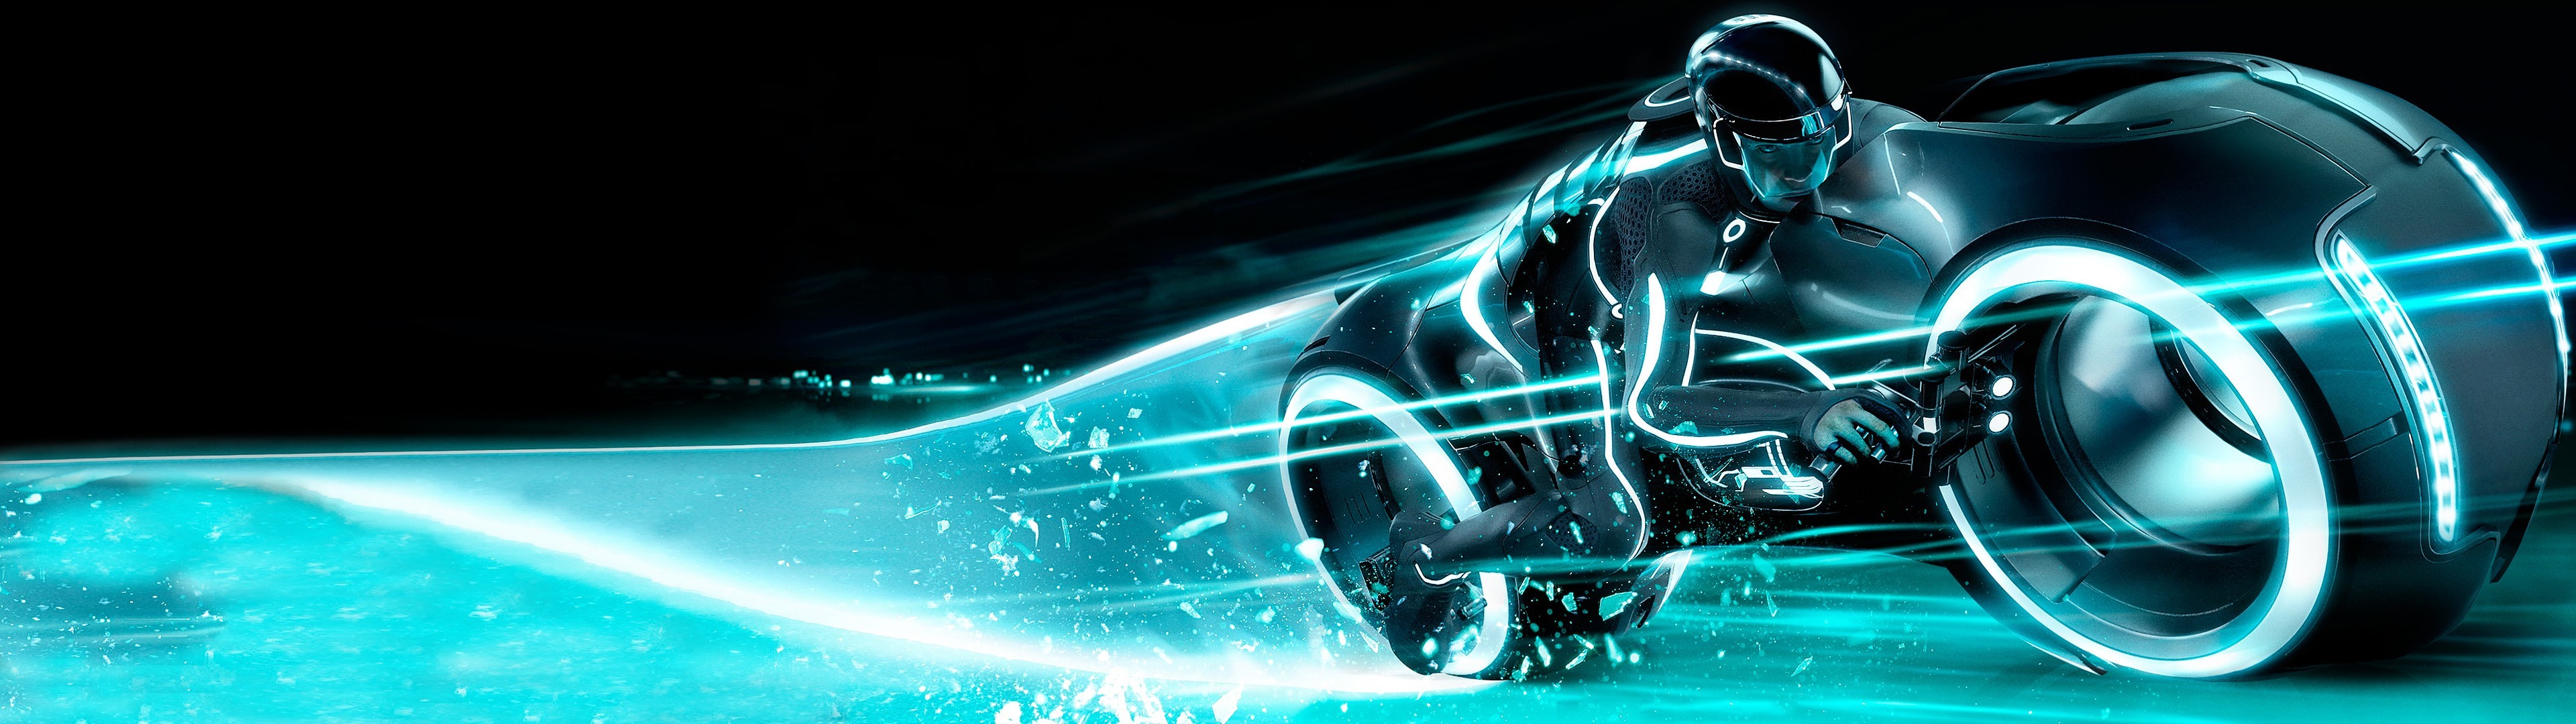 Tron Legacy TRON Wallpaper thestockmasters HD Wallpapers Pinterest Tron light cycle, Cycling and Wallpaper